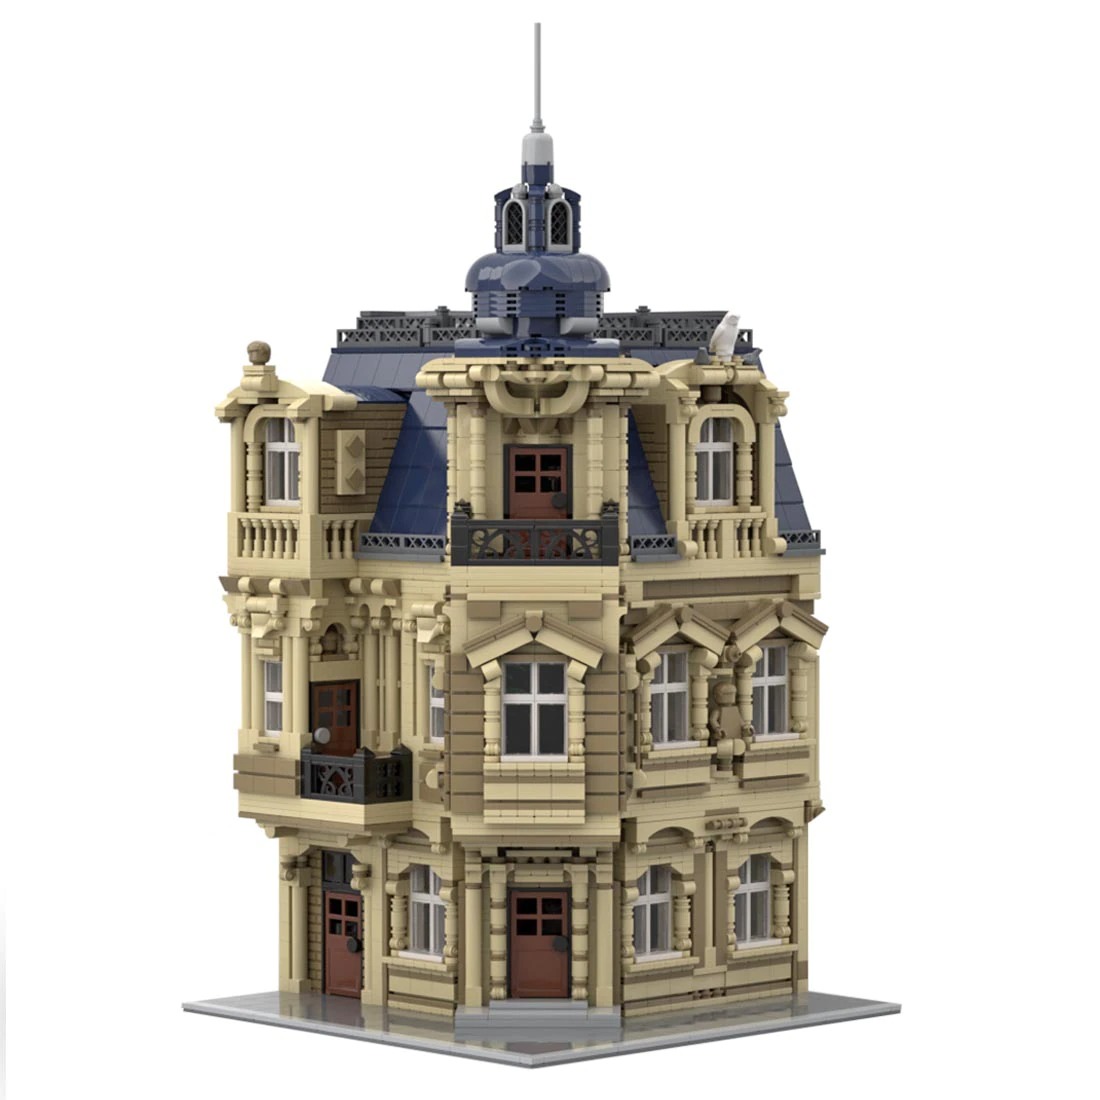 Beaux Arts Modular Building With Interior Moc 100562 6